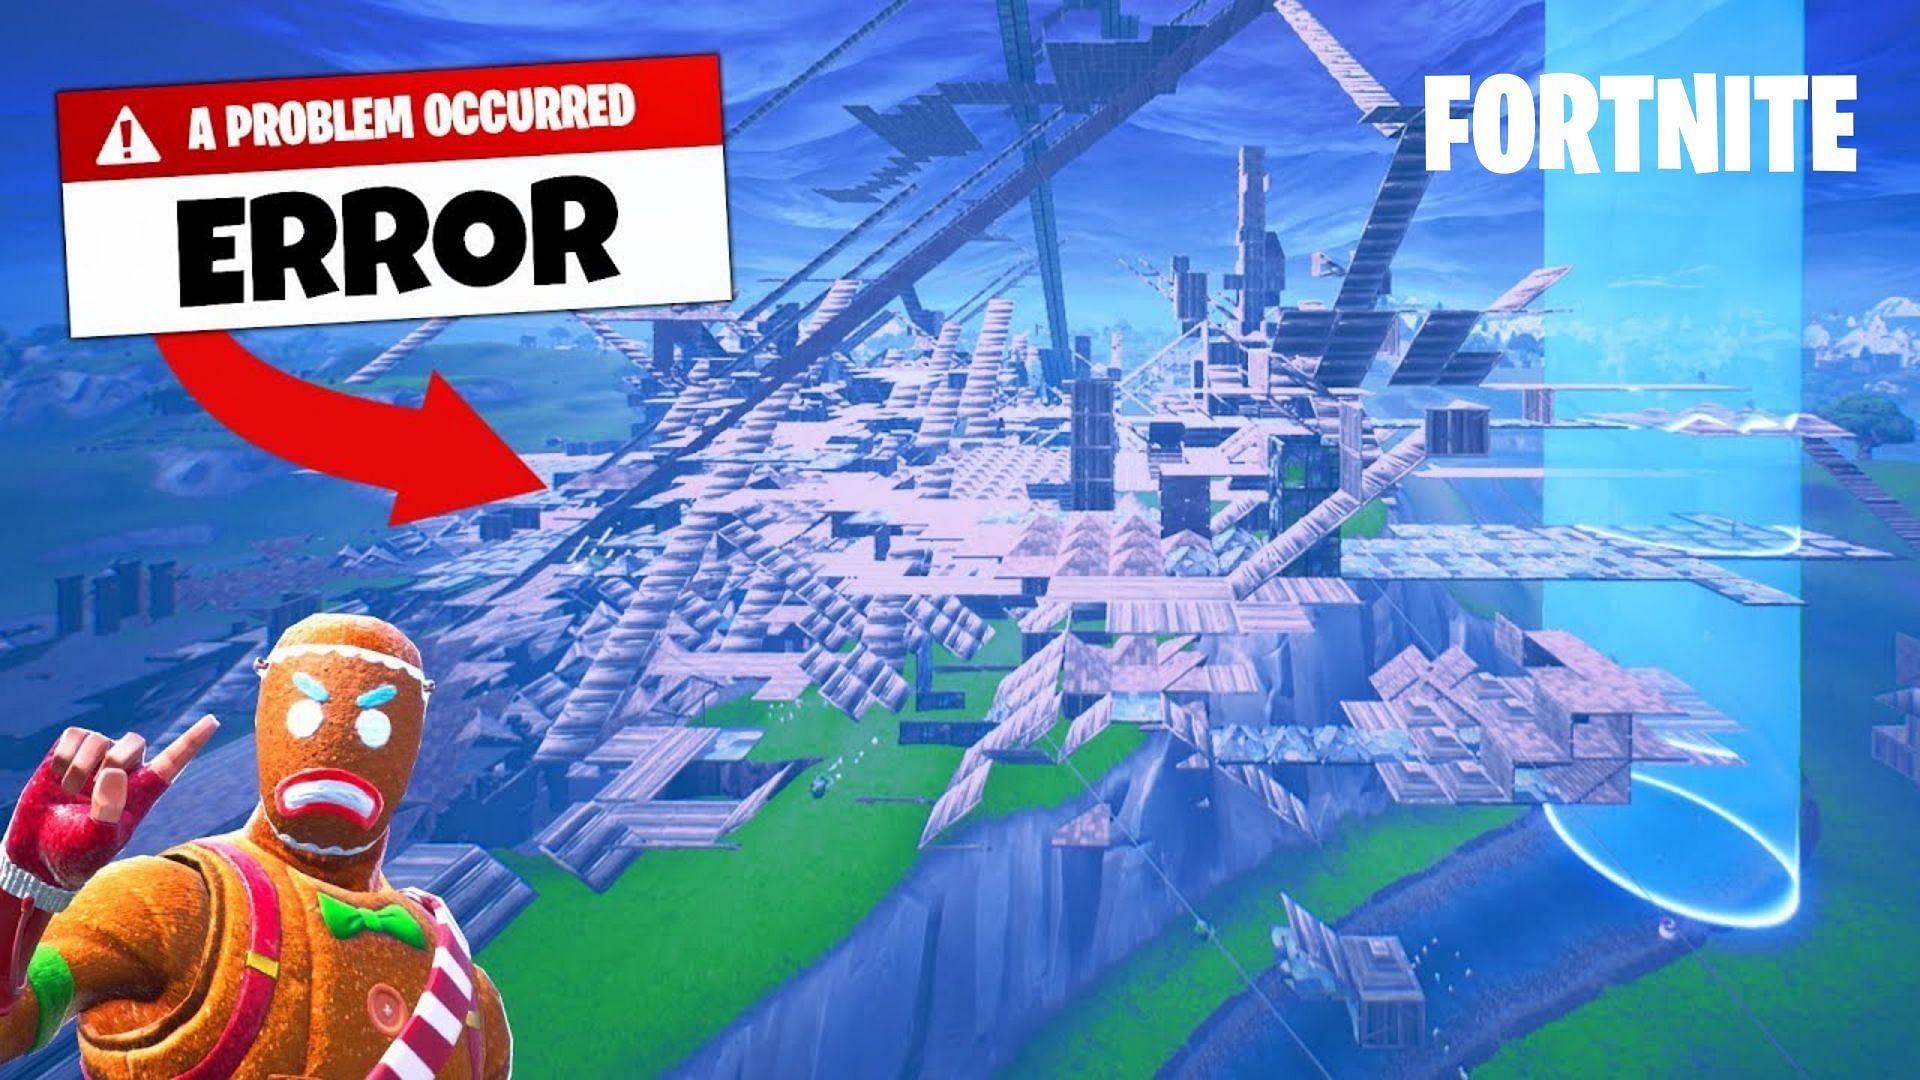 Lazarbeam teamed up with his viewers to crash the Fortnite servers (Image via Lazarbeam/YouTube)